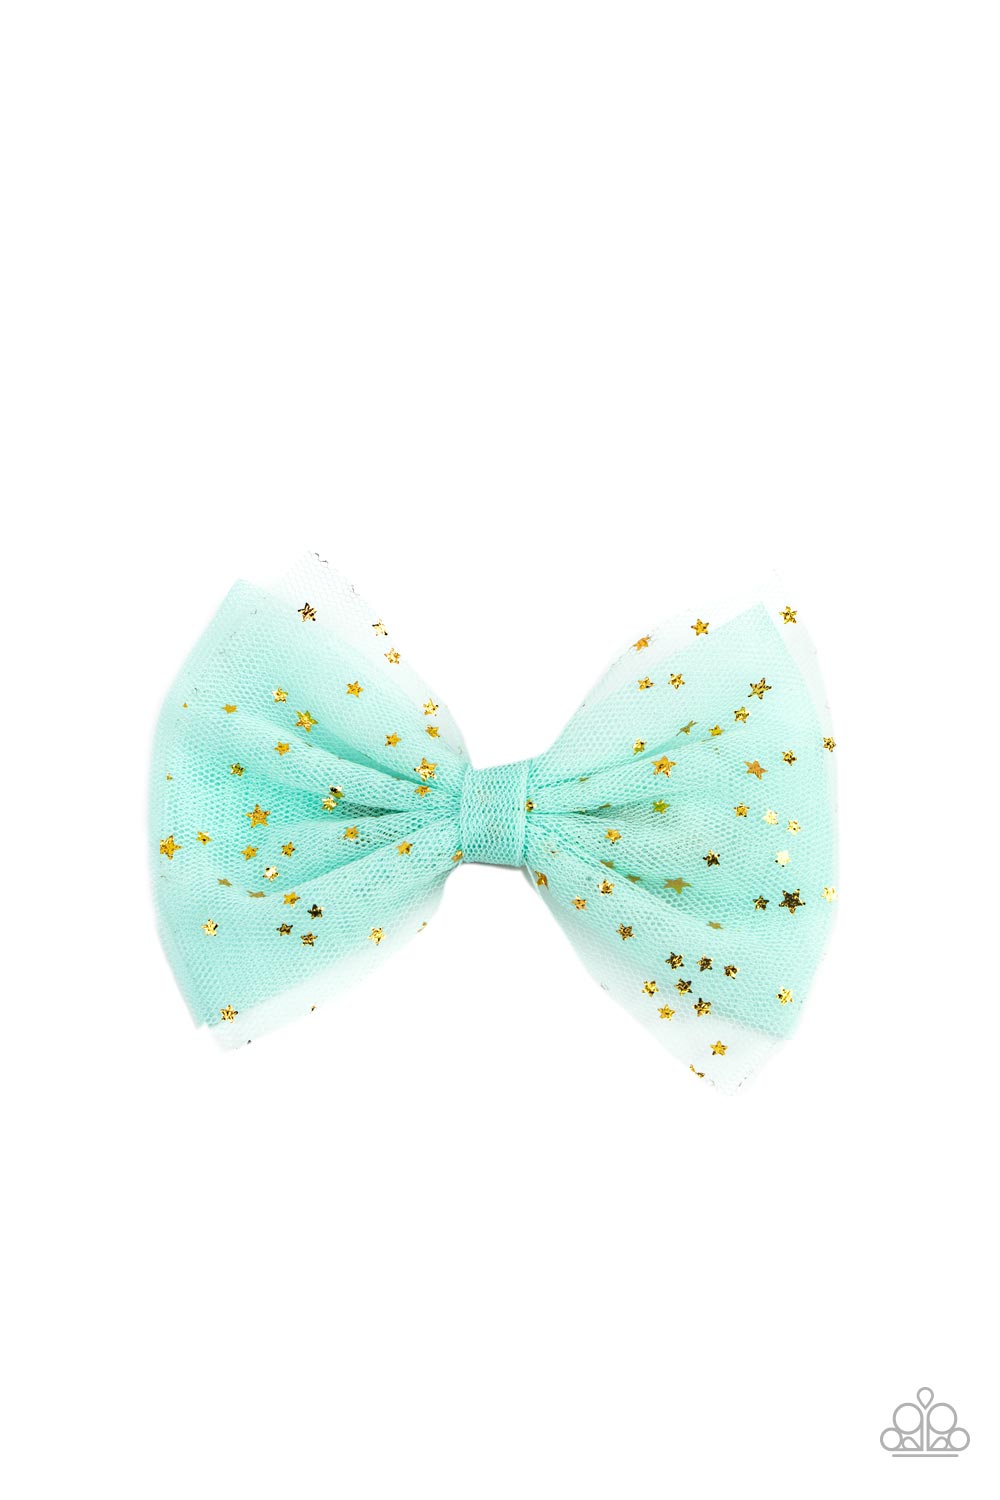 Twinkly Tulle Green Hair Clip - Paparazzi Accessories  Flecked in dainty gold stars, ribbons of minty green tulle delicately knot into a twinkly bow for a stellar fashion. Features a standard hair clip on the back.  All Paparazzi Accessories are lead free and nickel free!  Sold as one individual hair clip.